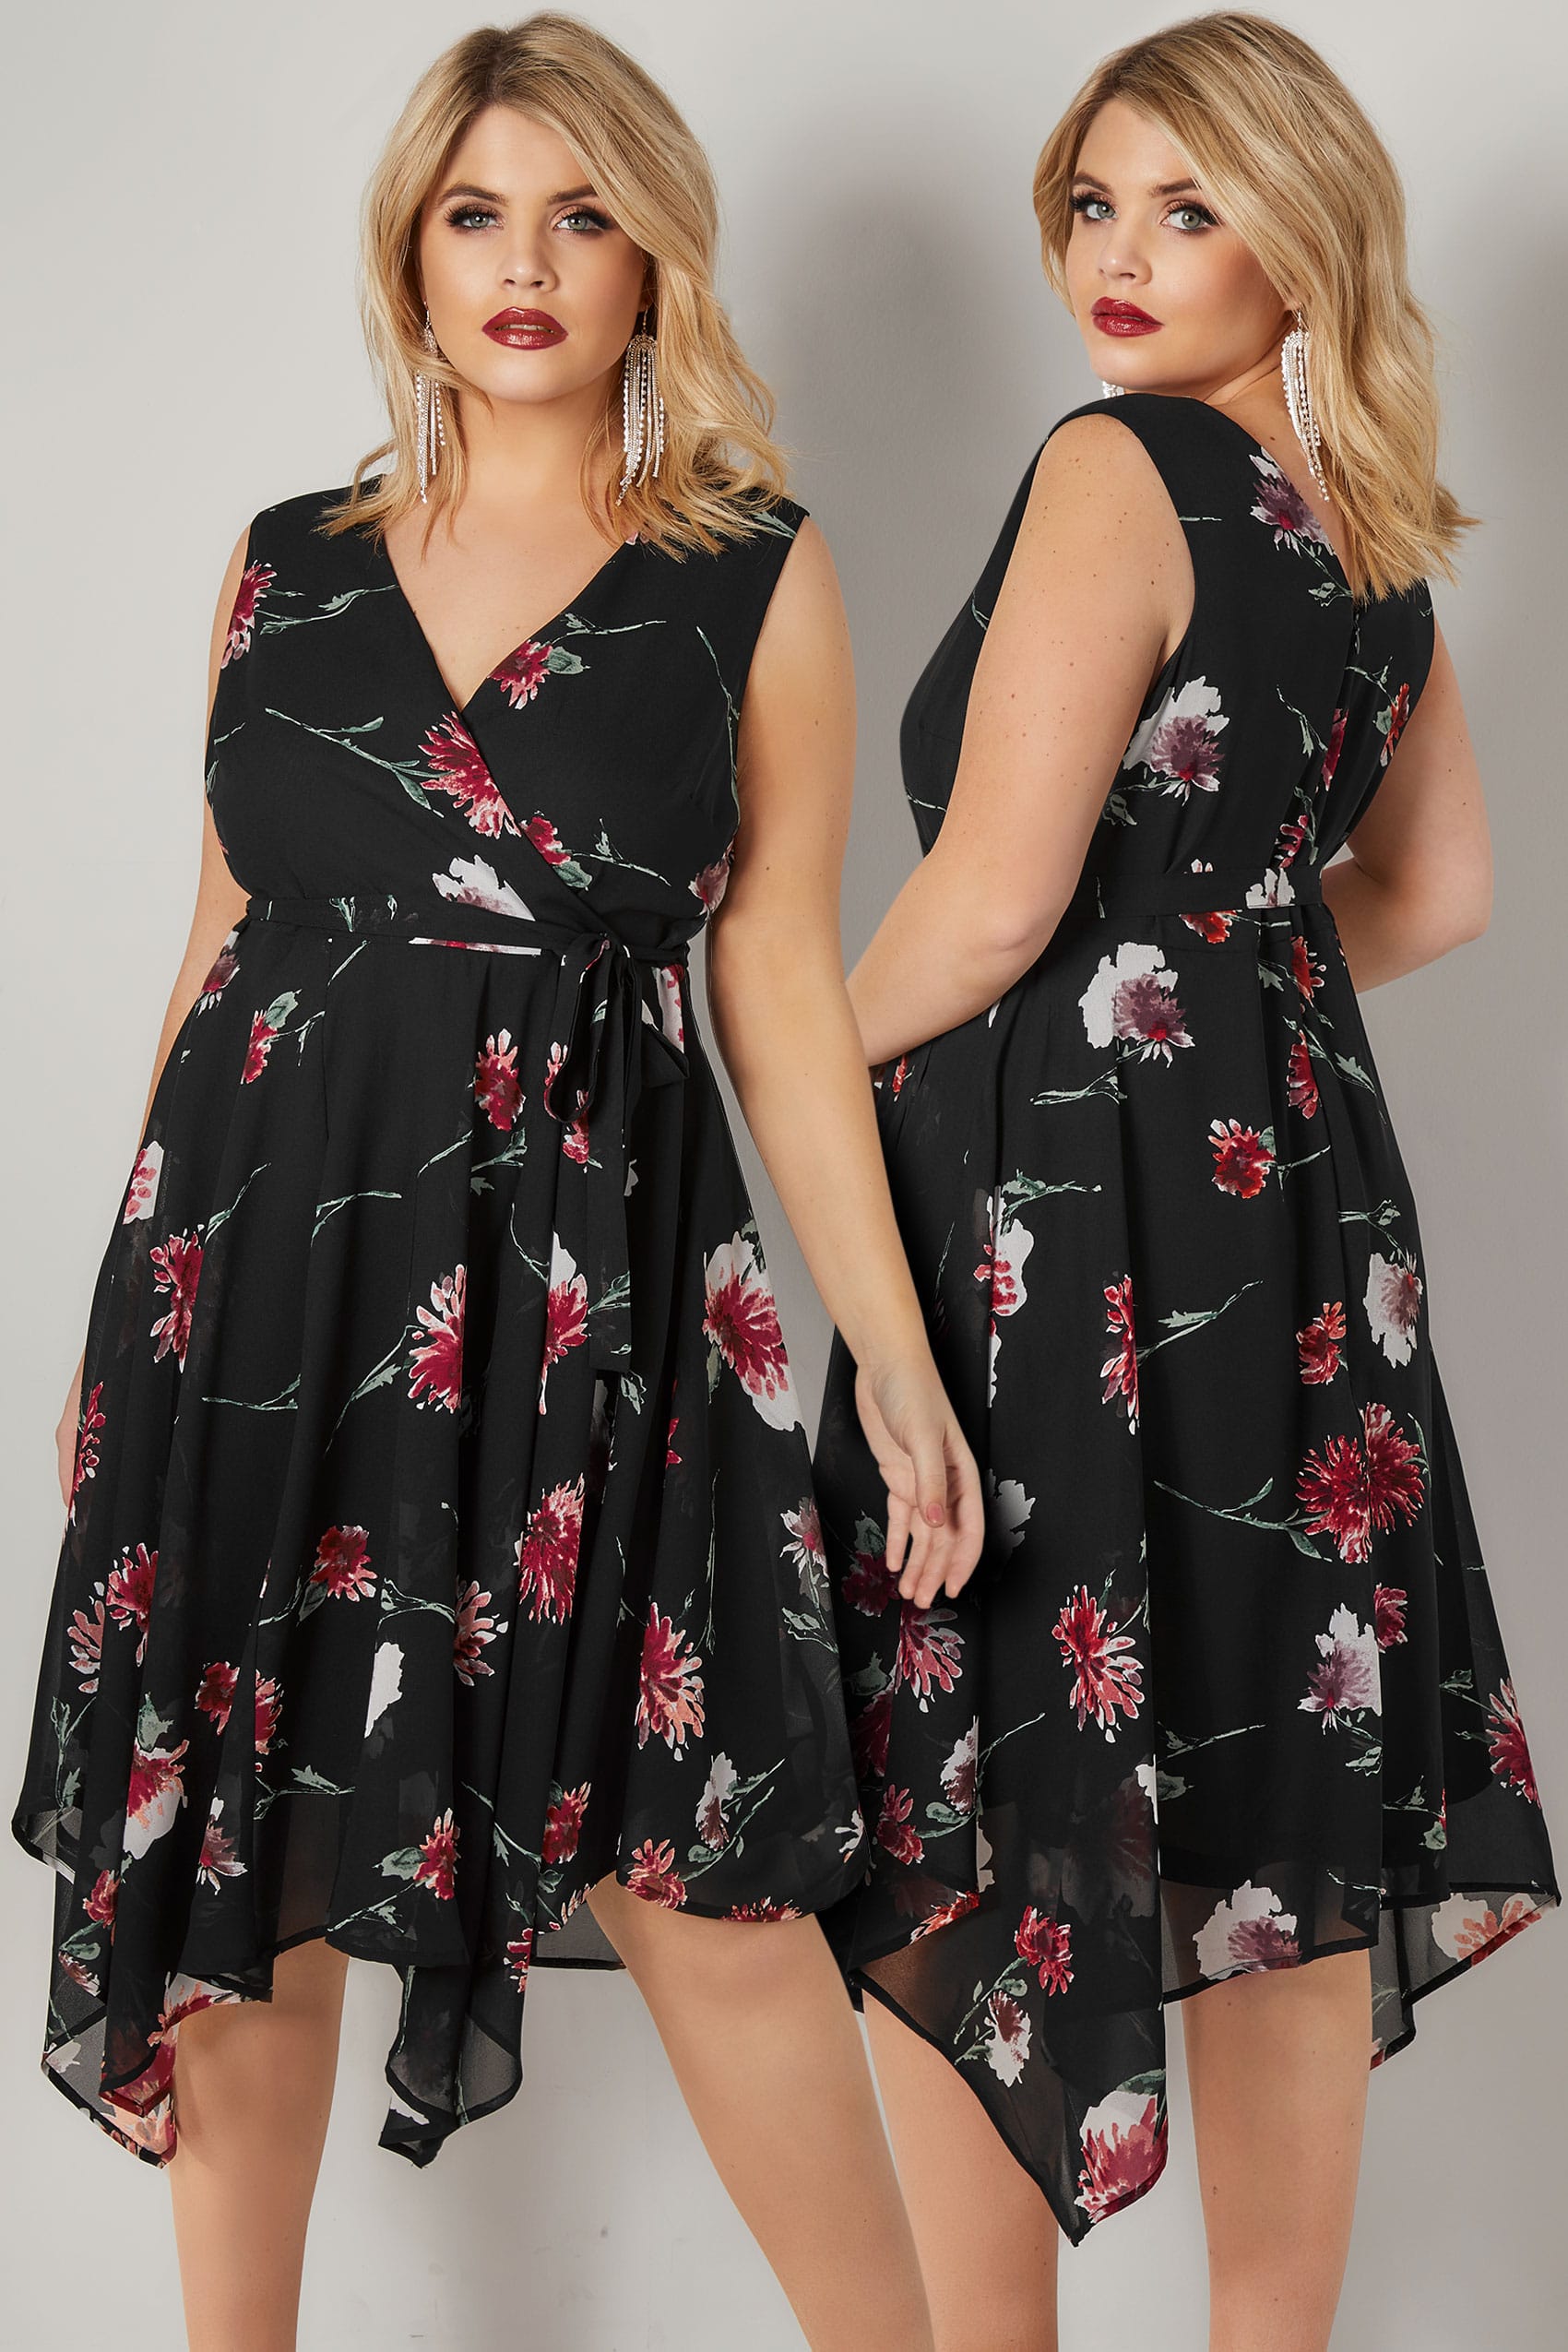 Black & Red Floral Print Wrap Dress With Hanky Hem, plus size 16 to 36